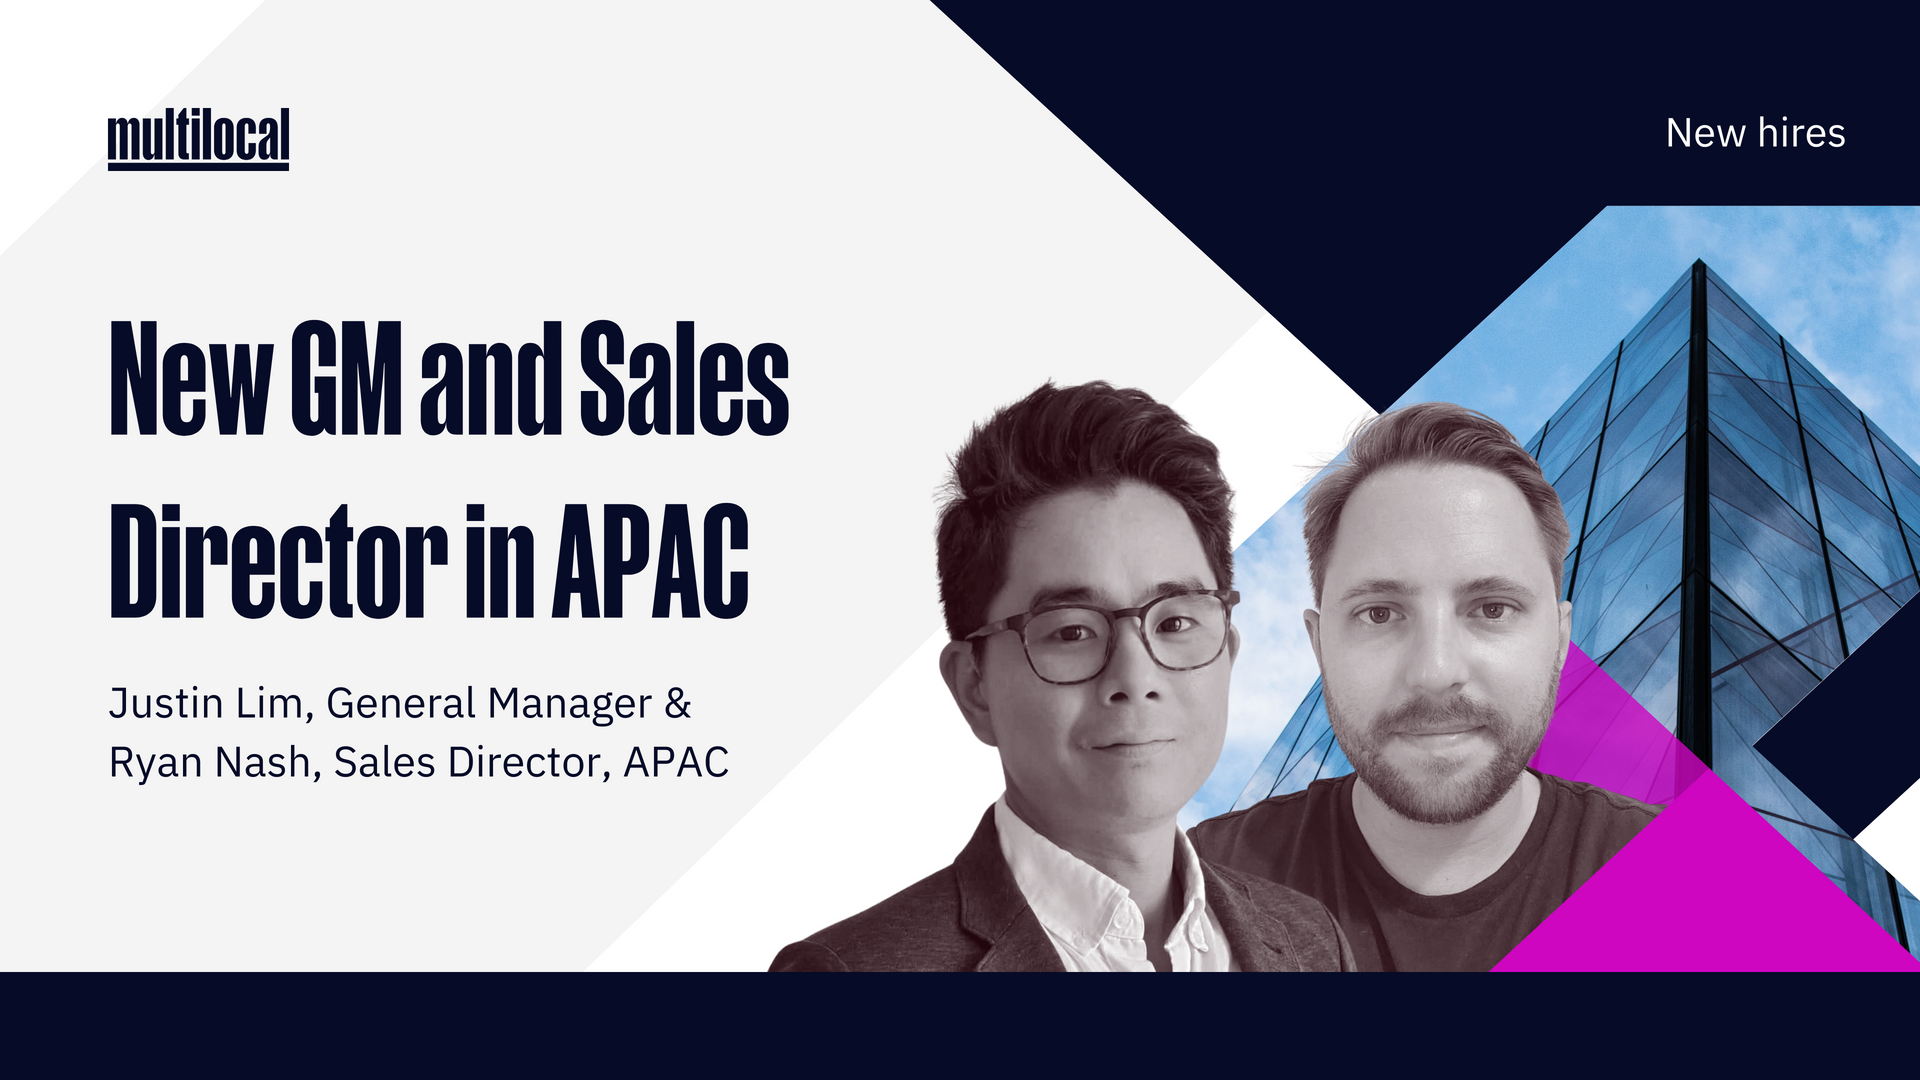 Headshots of Multilocal's new GM and Sales Director in APAC